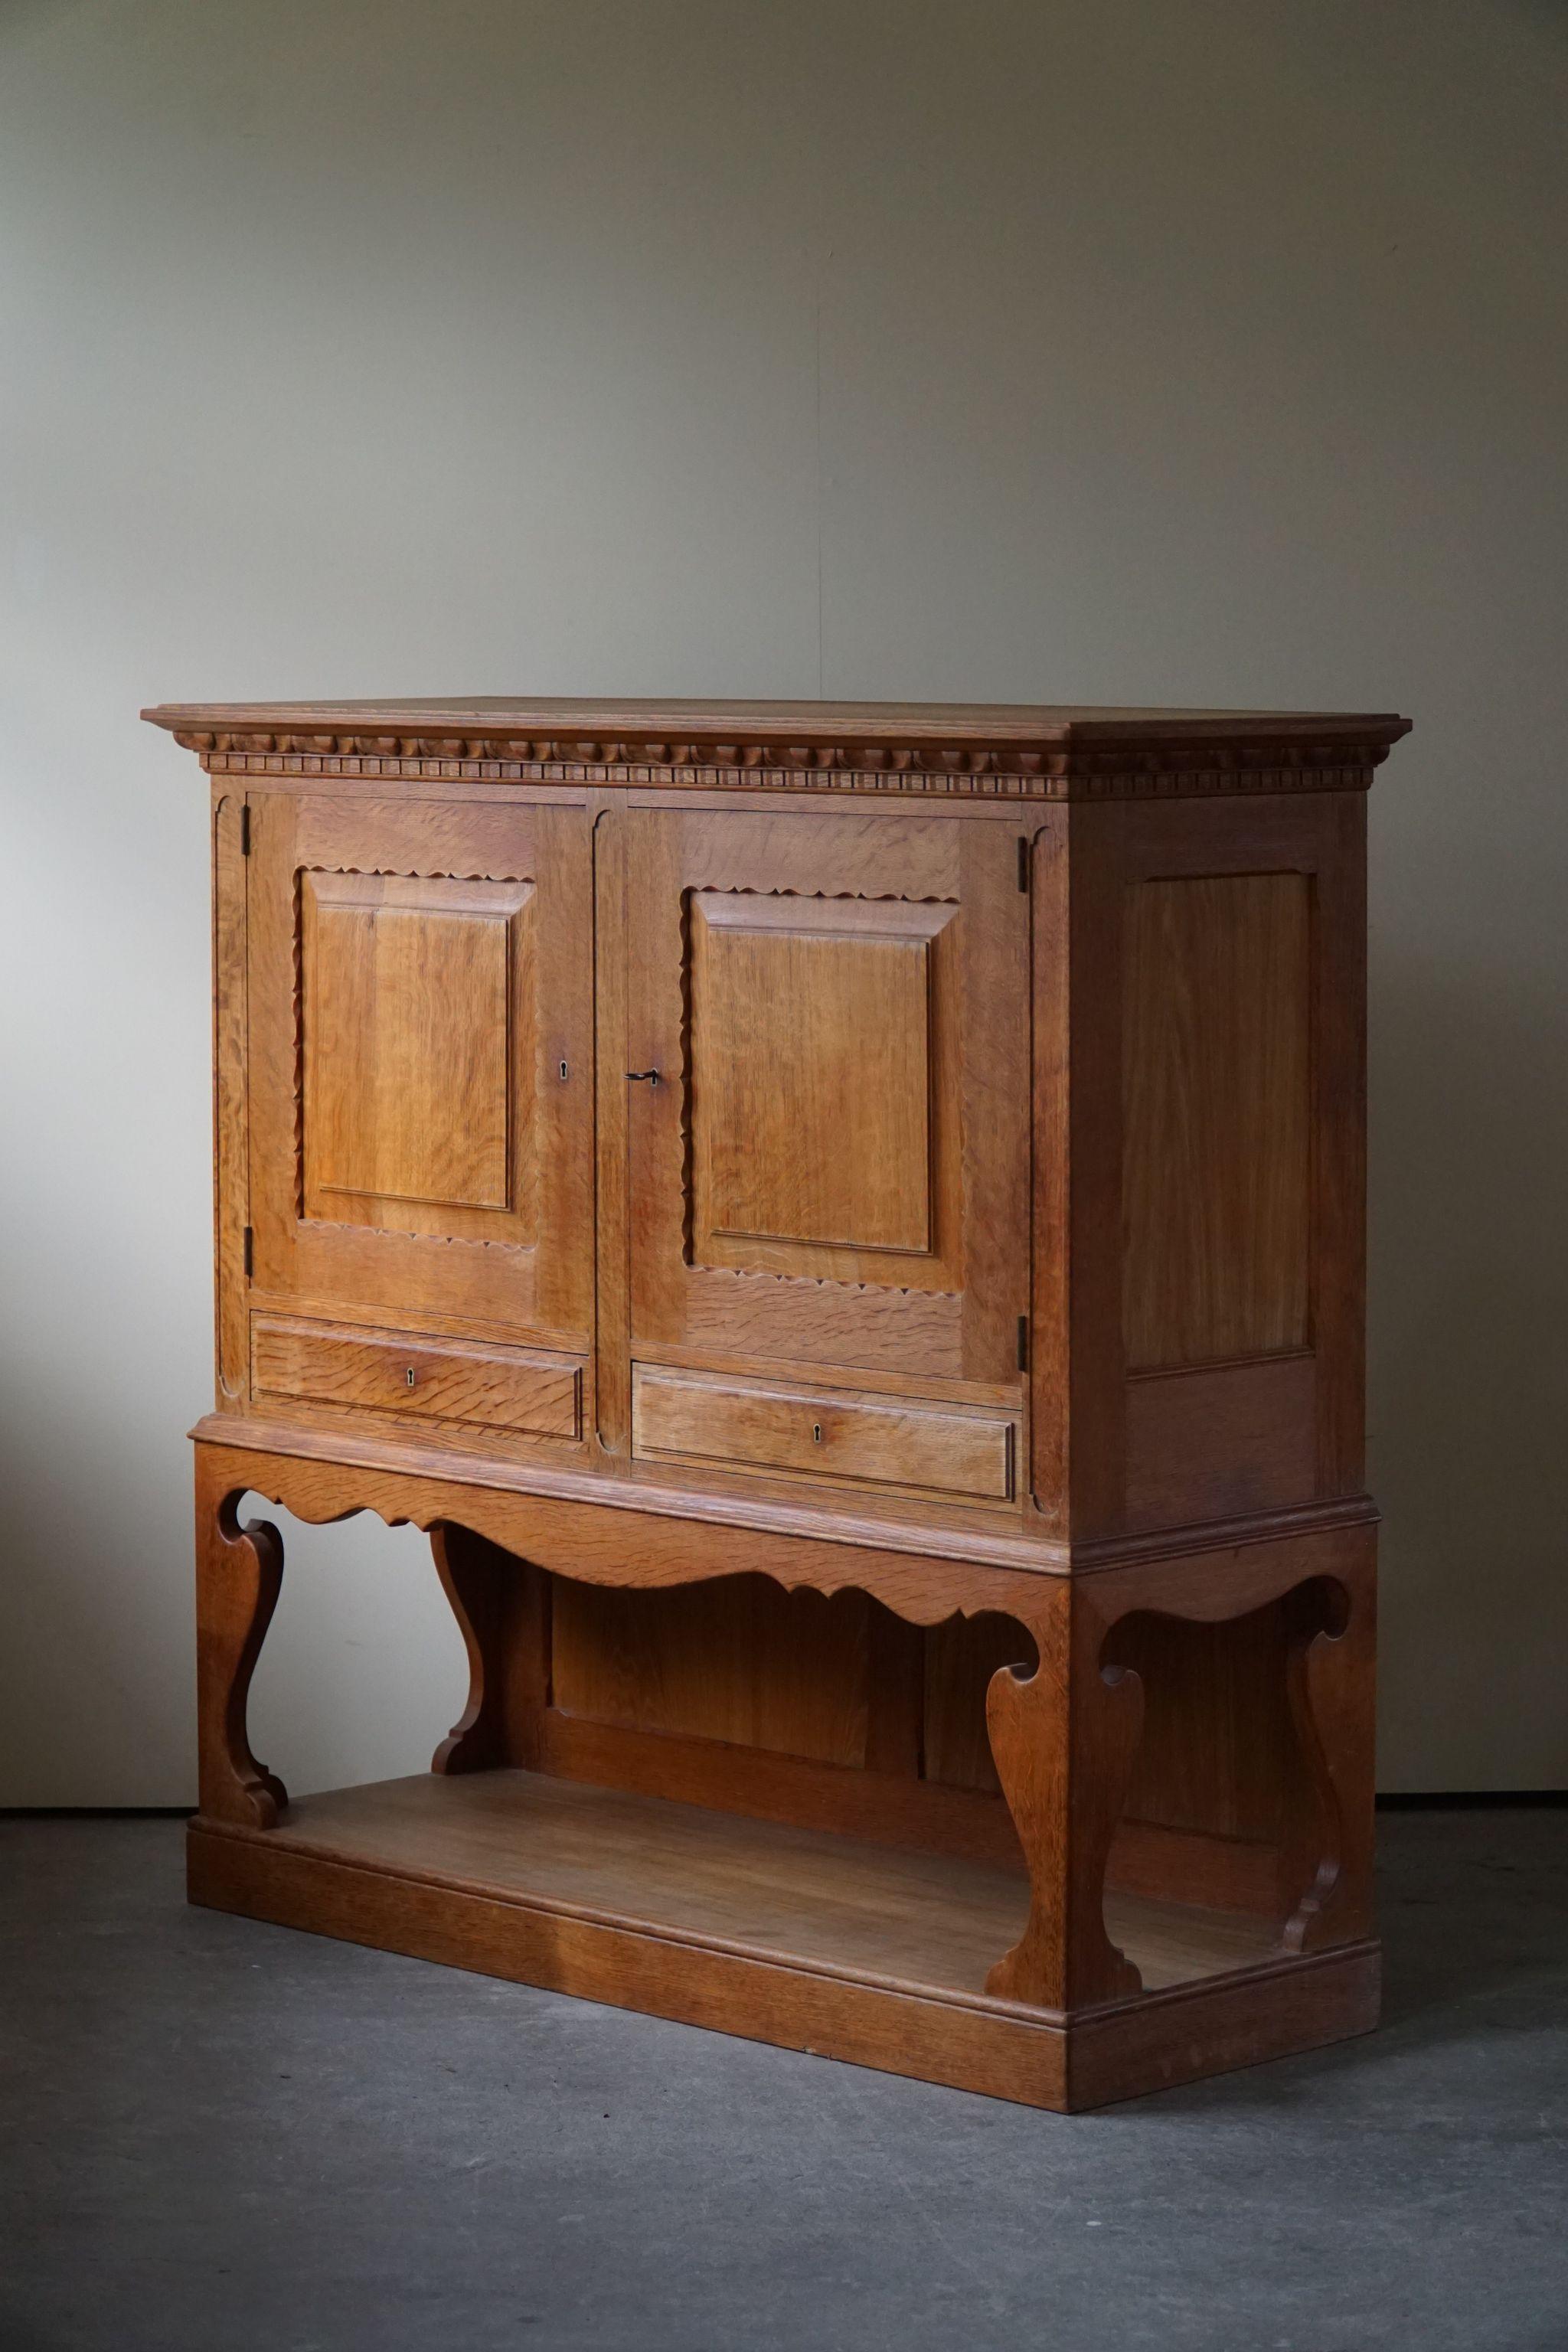 A beautiful handcrafted cabinet - perfect storage furniture for the living room with space for your art and books.
The cabinet is made of high-quality oak in the 1940s by a Danish cabinetmaker. This piece is in a great vintage condition, with few